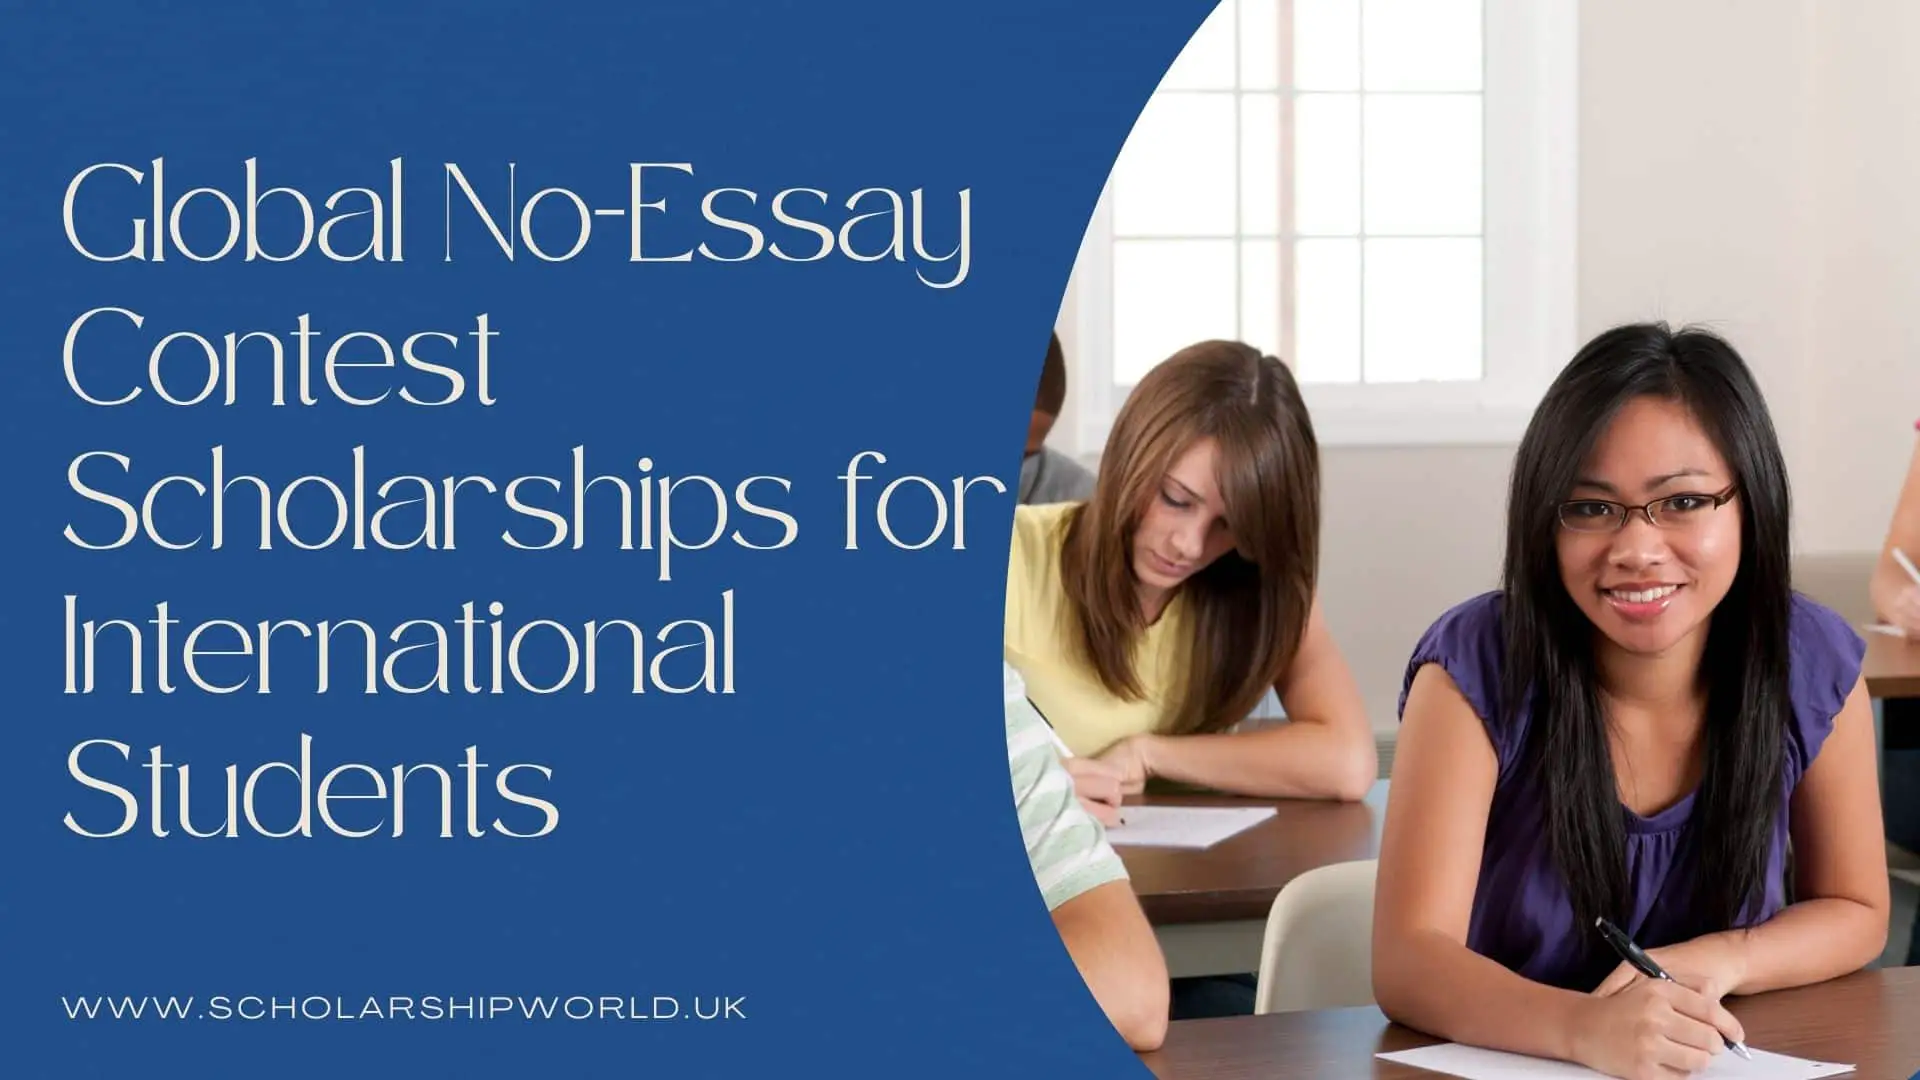 Global No-Essay Contest Scholarships for International Students 2022-2023